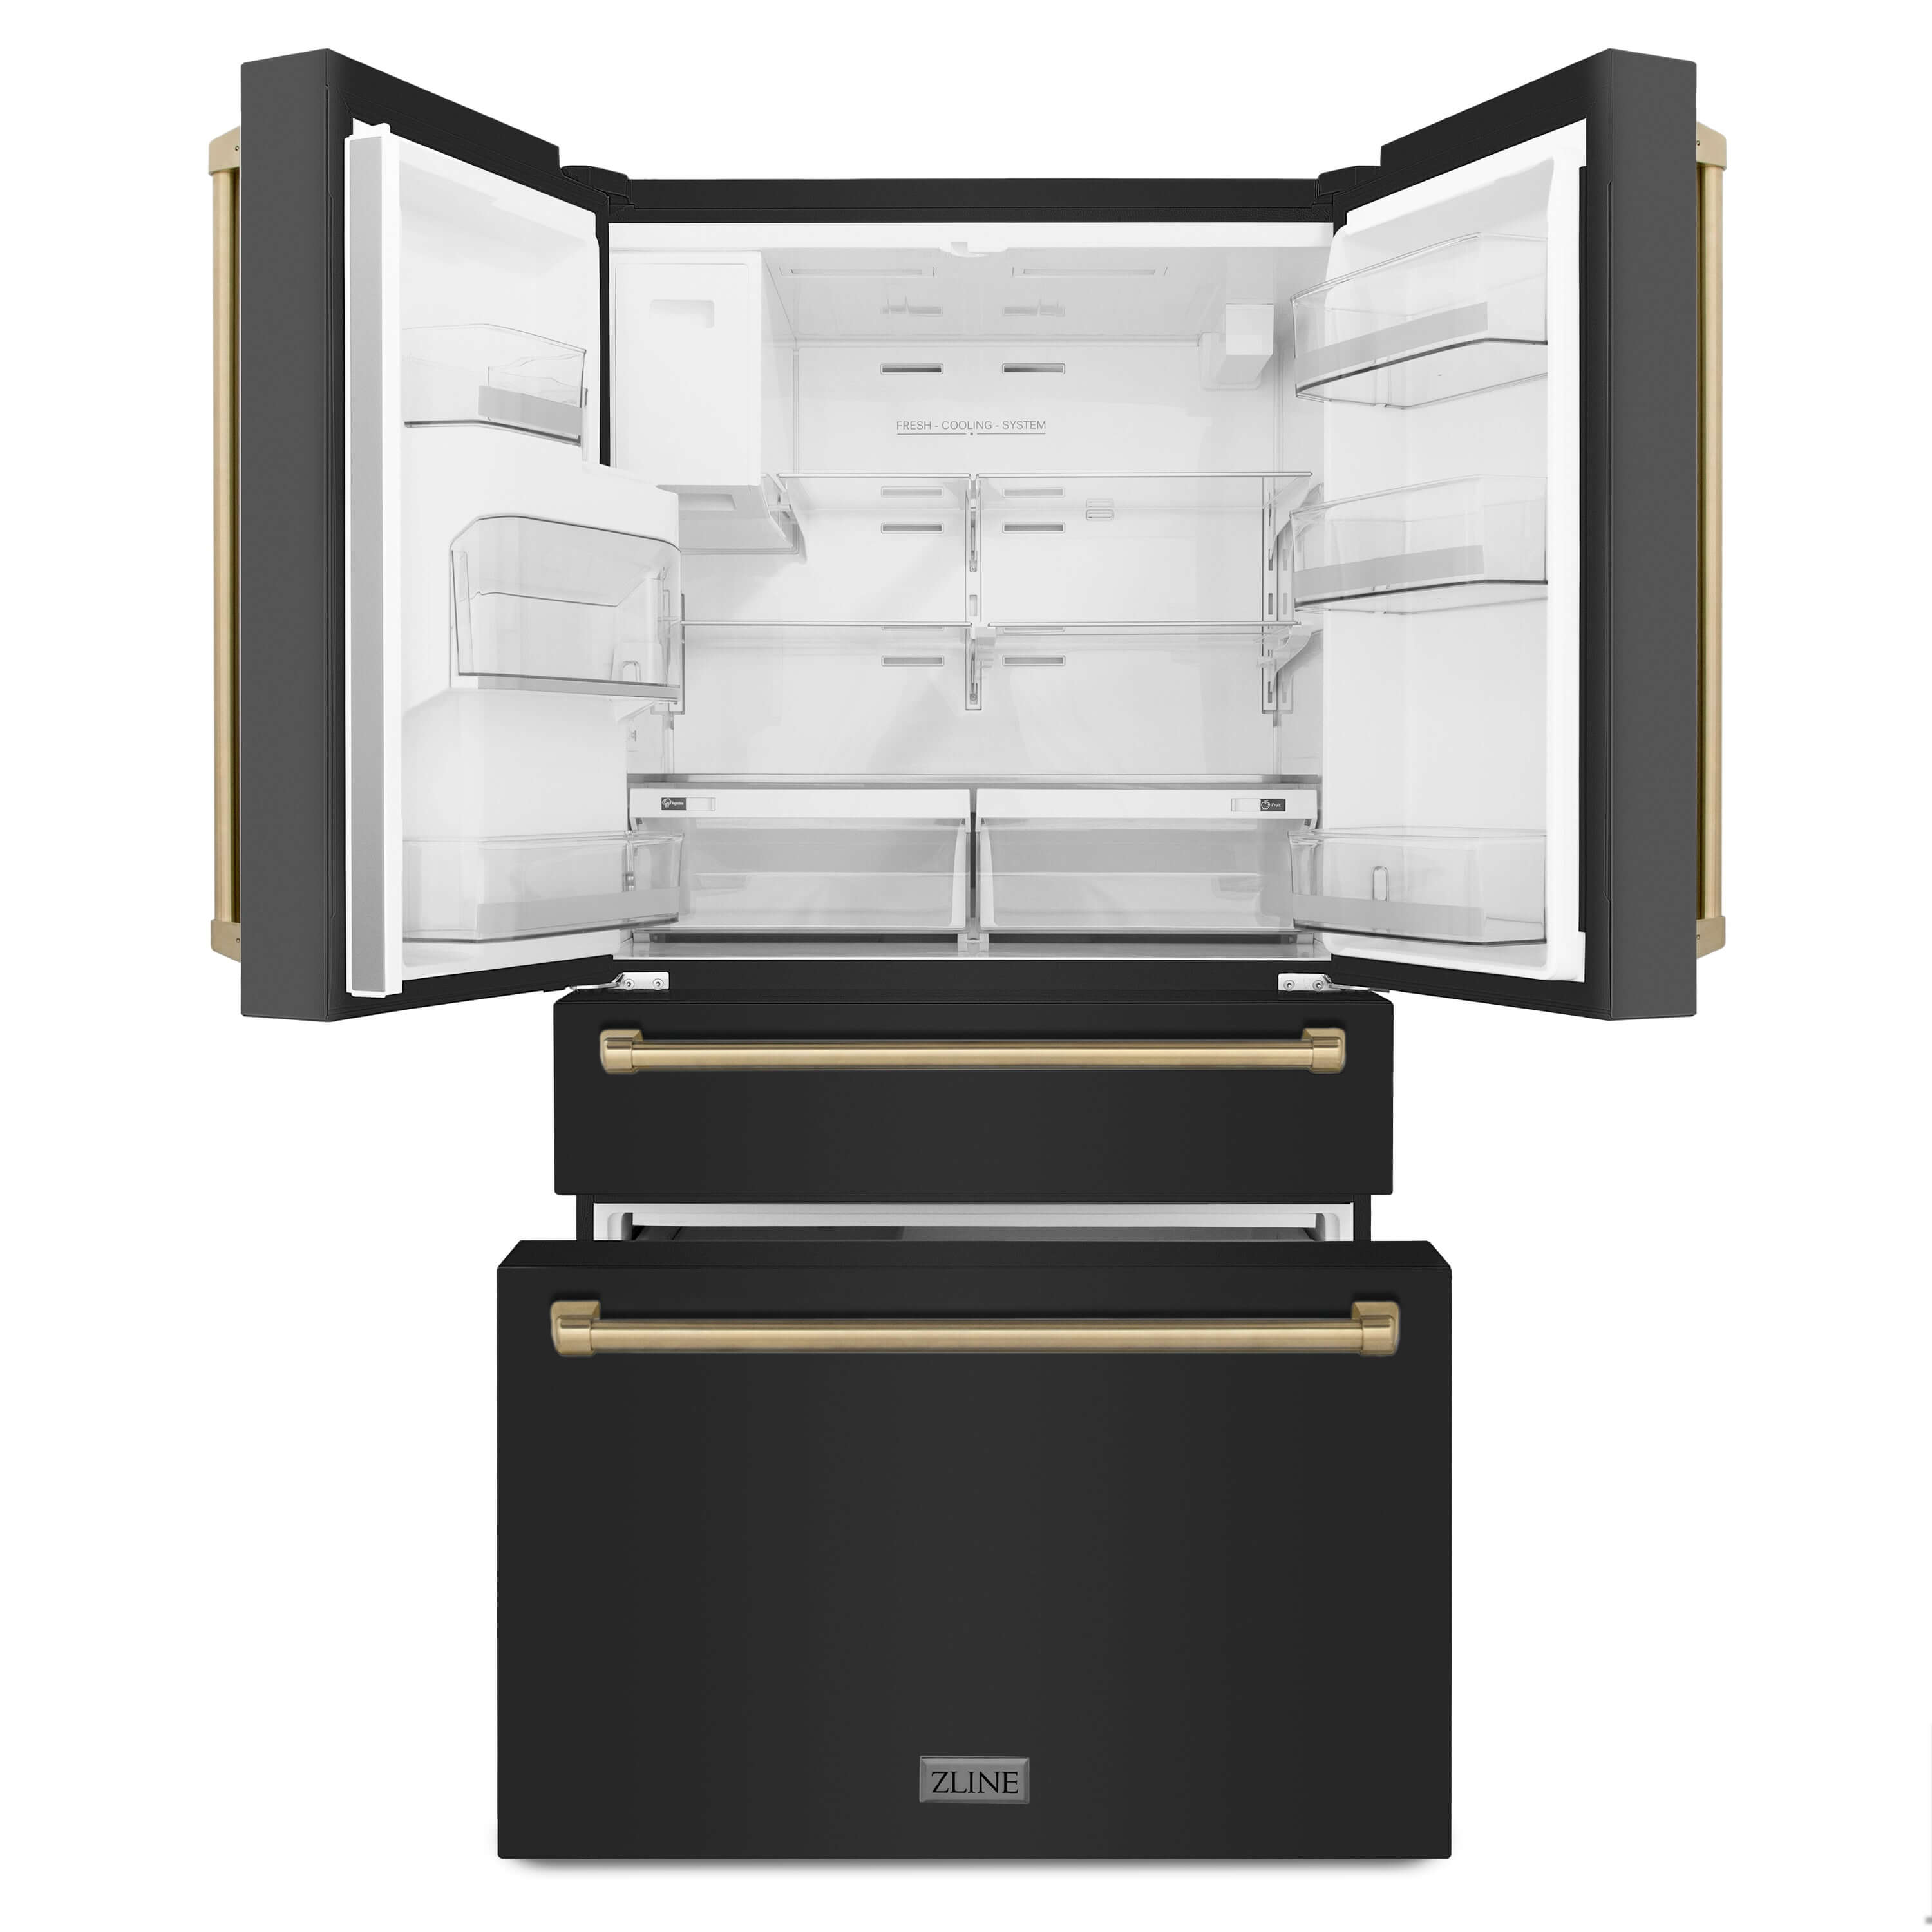 ZLINE 36 in. Autograph Edition French Door Refrigerator in Black Stainless Steel with Champagne Bronze Accents (RFMZ-W-36-BS-CB) front with doors and bottom freezer drawers open and internal LED lights on.